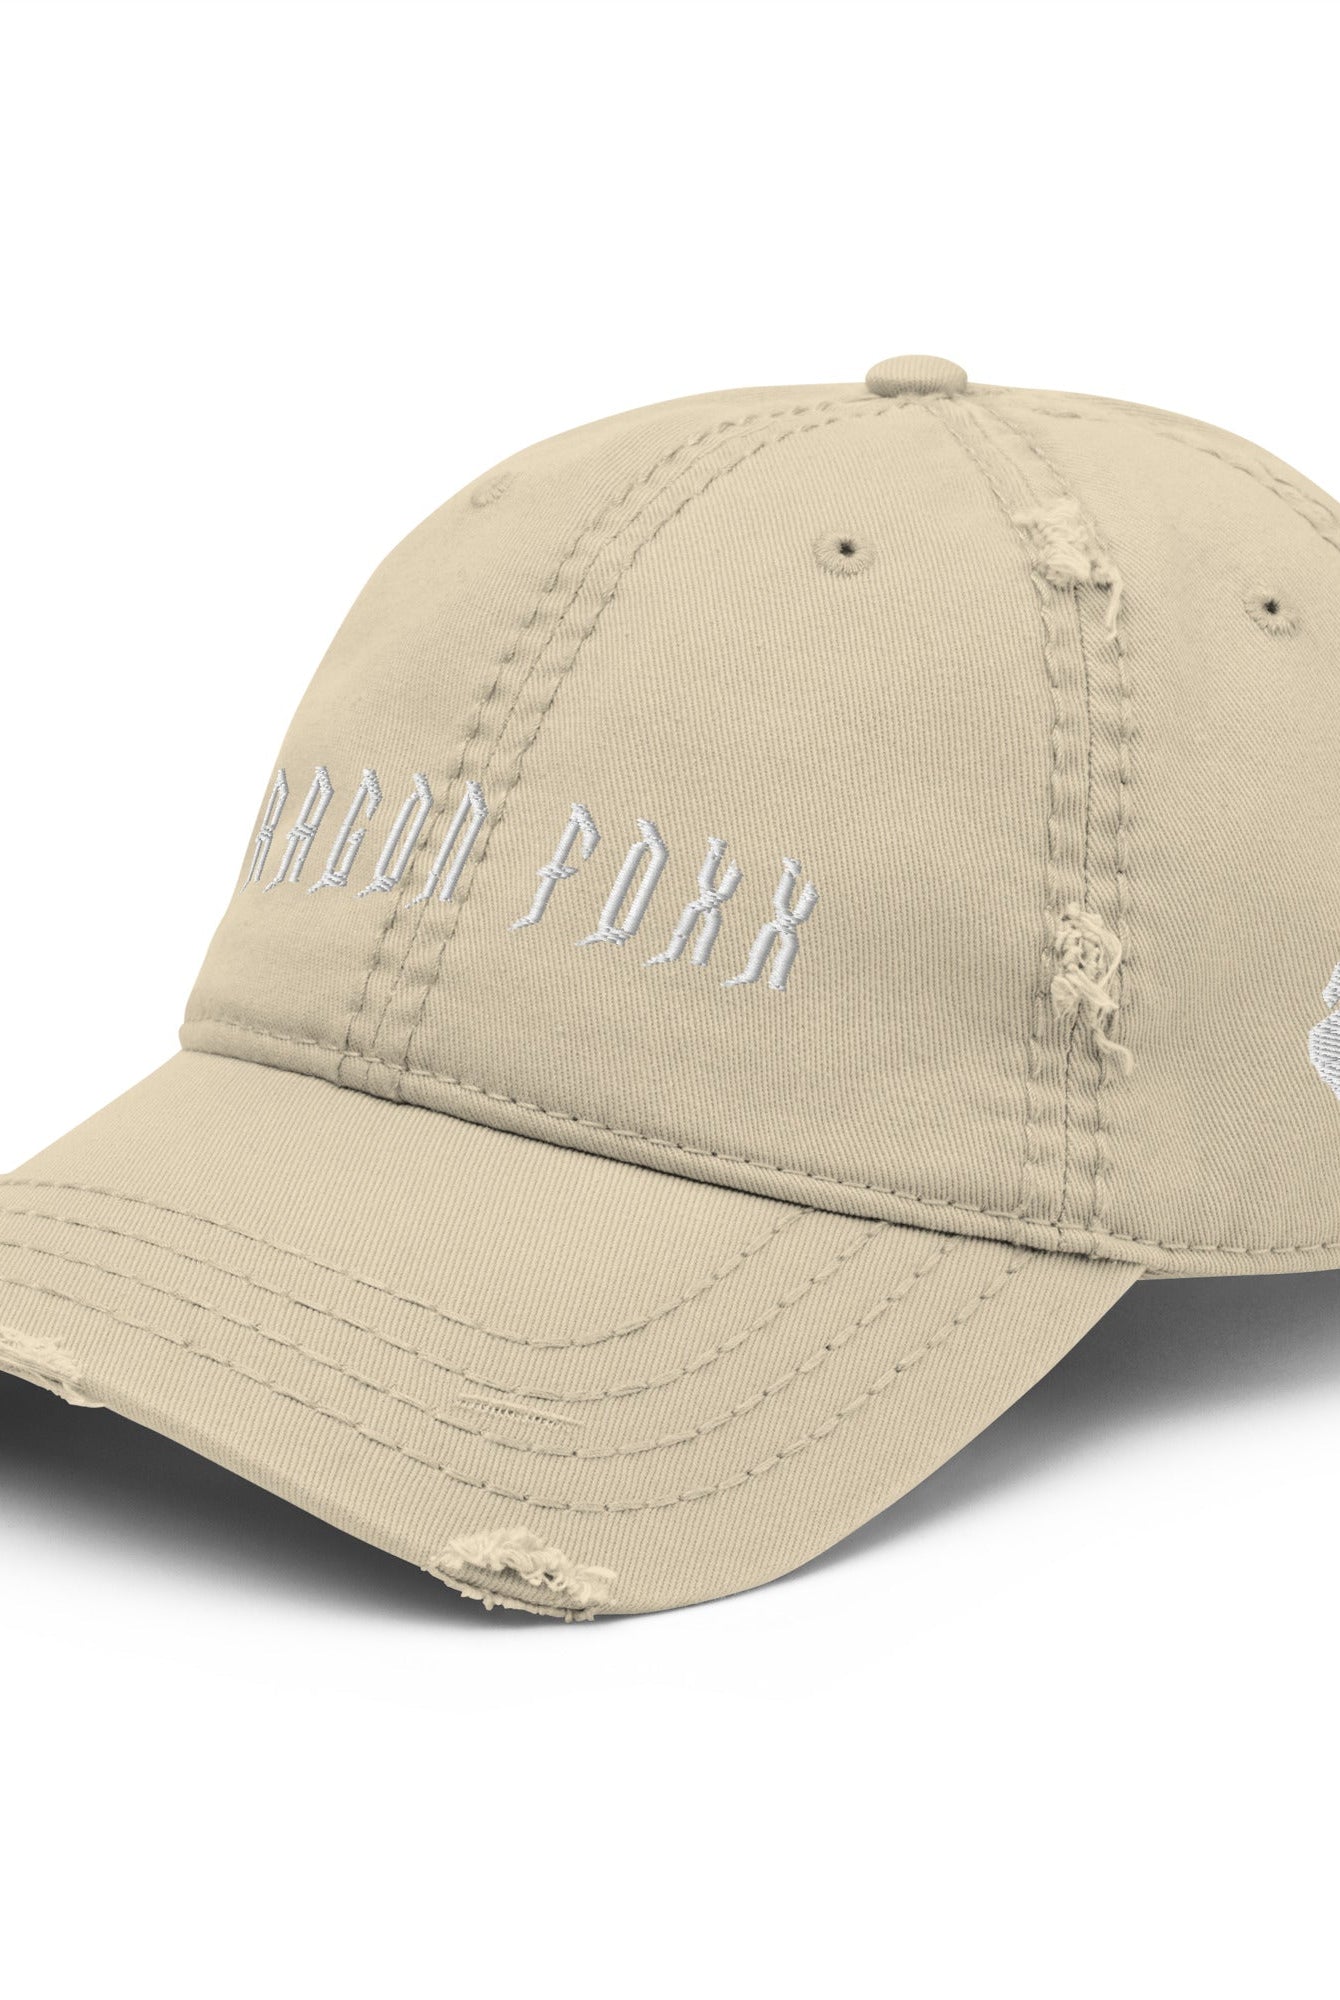 Distressed Dad Hats - White Embroidered - Distressed Dad Hat - DRAGON FOXX™ - Distressed Dad Hats - White Embroidered - 7823977_10993 - Khaki - Distressed - One size - Accessories - Black Distressed Hat - Charcoal Grey Distressed Hat